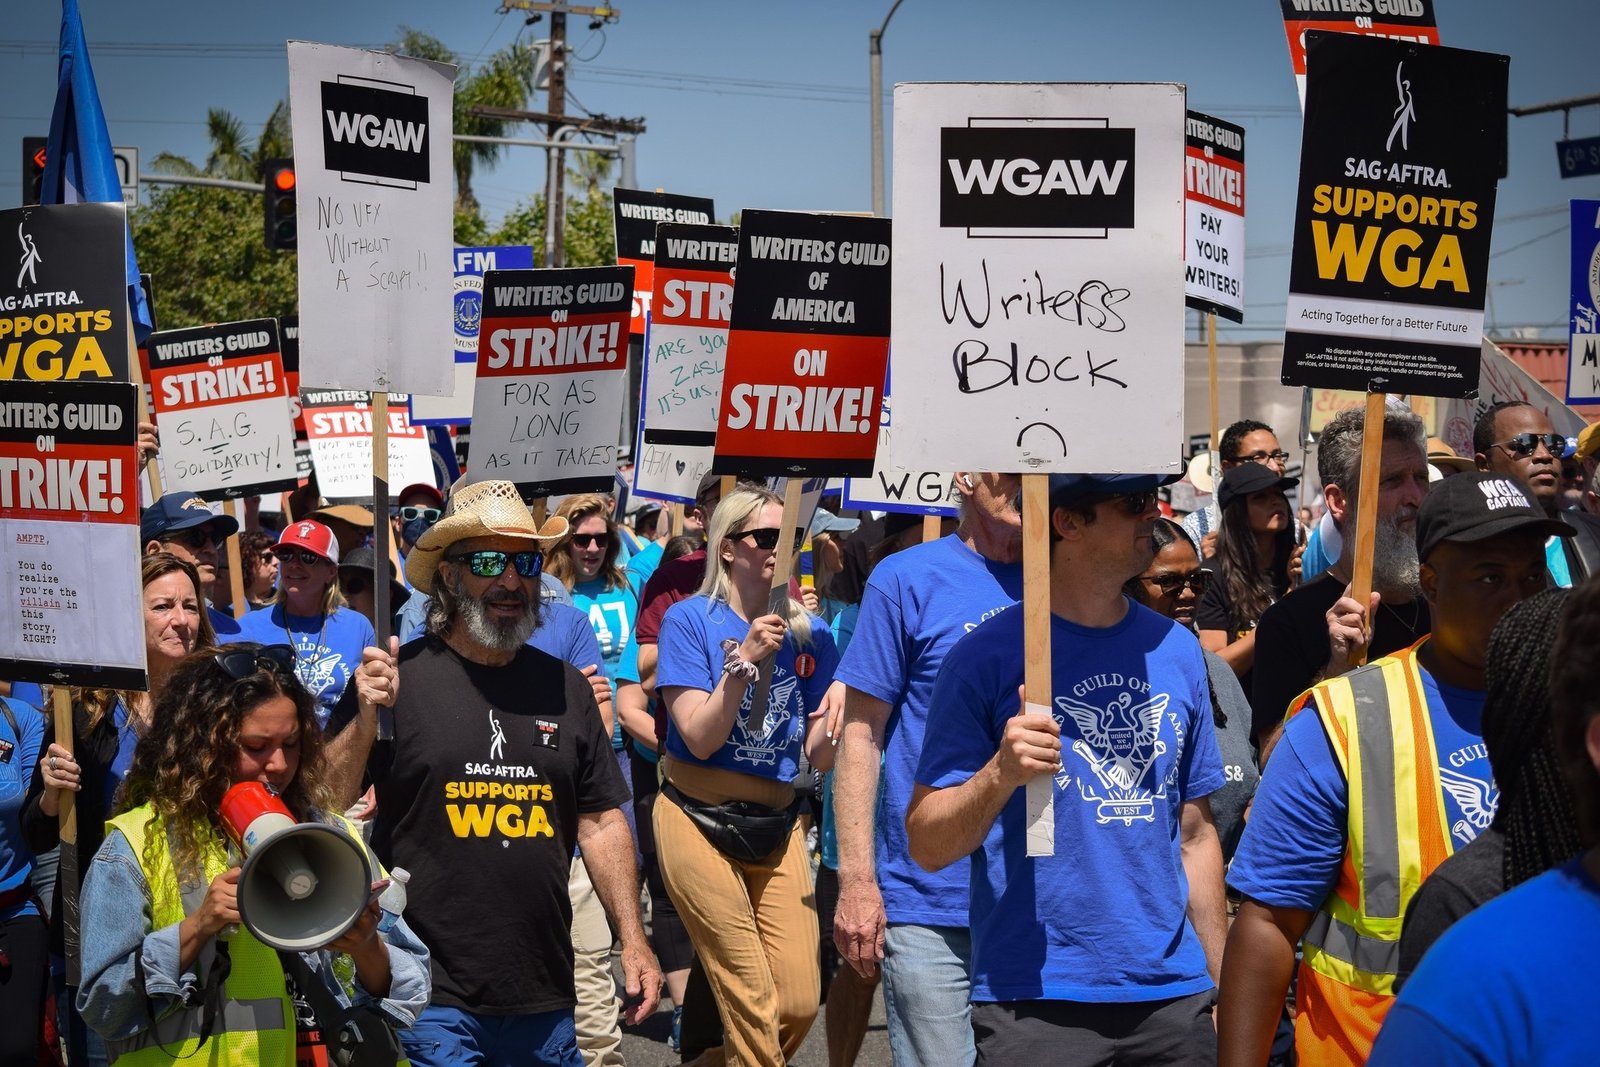 65,000 actors went on strike, demanding to quit their jobs in Hollywood